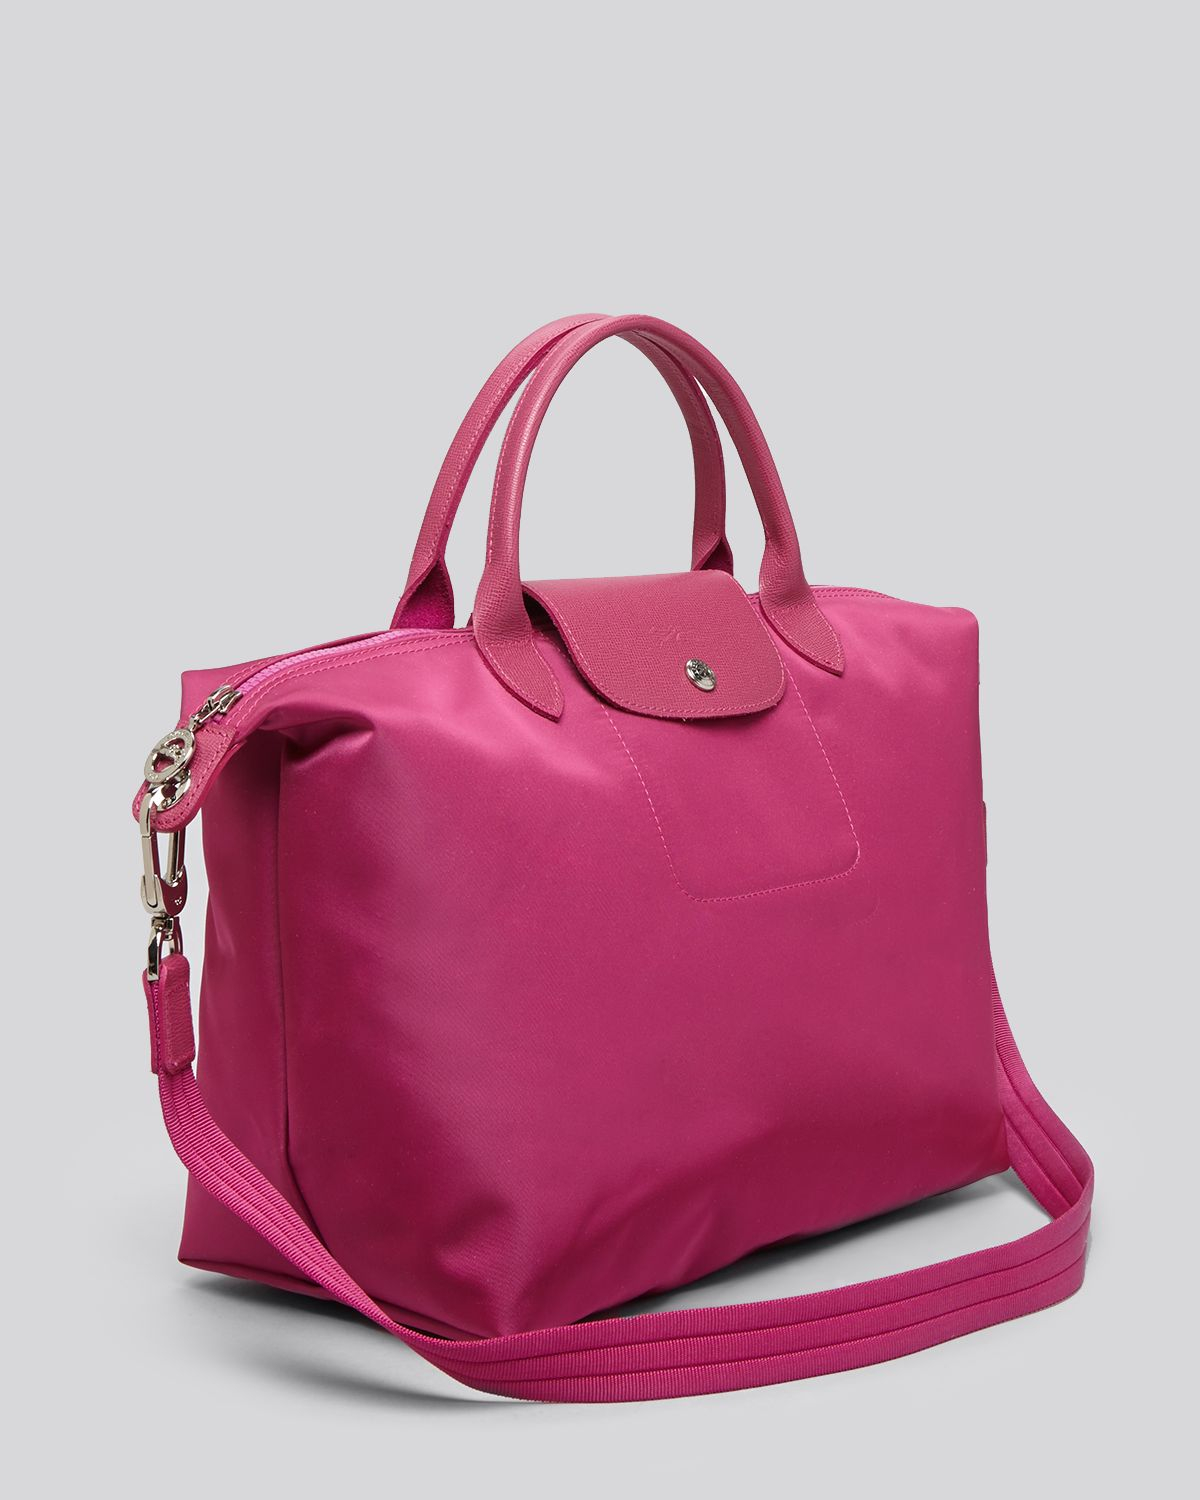 Longchamp Tote - Exclusive Le Pliage Neo Medium in Pink - Lyst